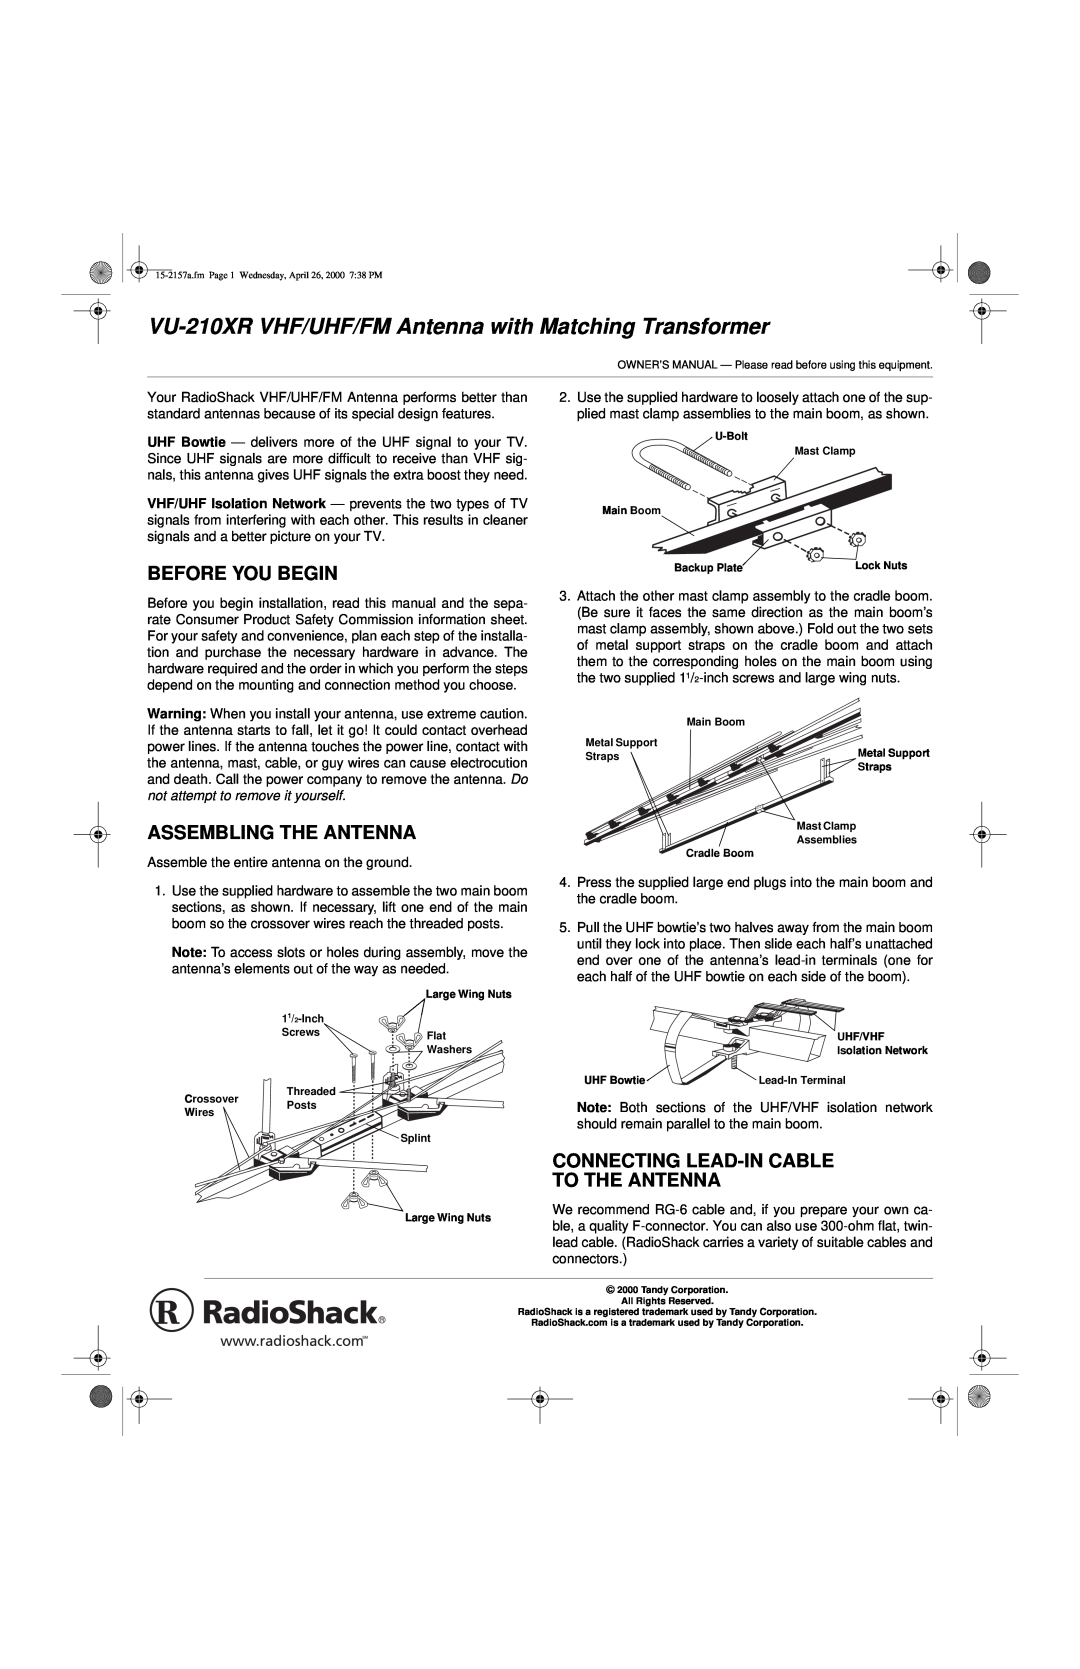 Radio Shack VU-210XR owner manual Before You Begin, Assembling The Antenna, Connecting Lead-In Cable To The Antenna 